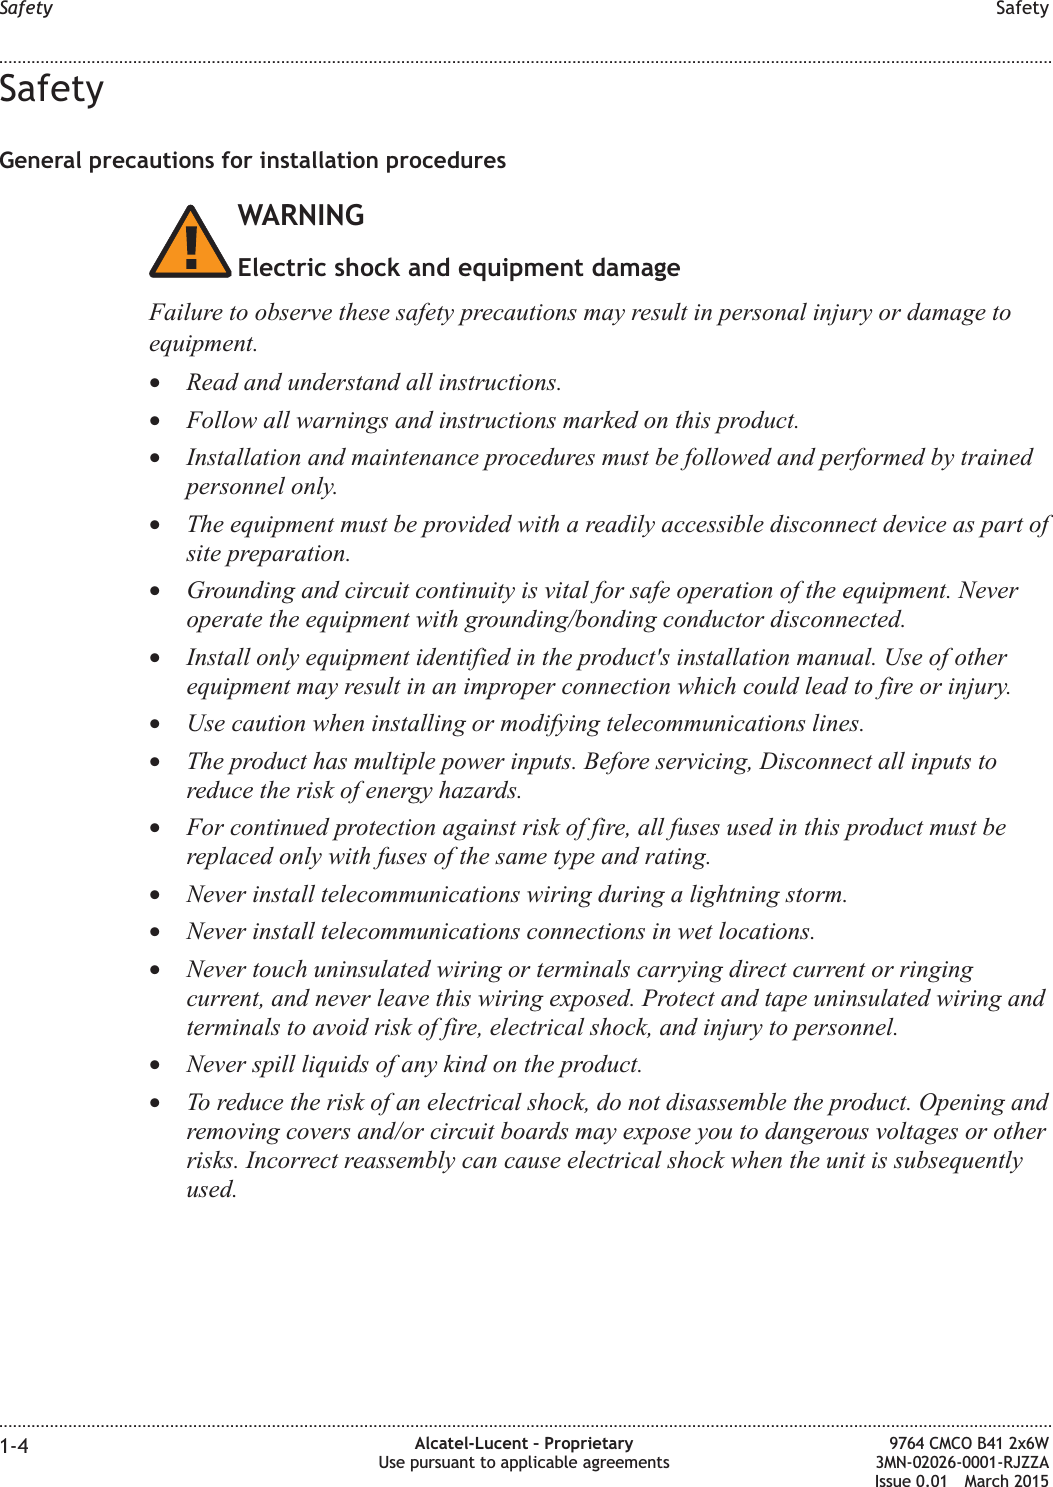 SafetyGeneral precautions for installation proceduresWARNINGElectric shock and equipment damageFailure to observe these safety precautions may result in personal injury or damage toequipment.•Read and understand all instructions.•Follow all warnings and instructions marked on this product.•Installation and maintenance procedures must be followed and performed by trainedpersonnel only.•The equipment must be provided with a readily accessible disconnect device as part ofsite preparation.•Grounding and circuit continuity is vital for safe operation of the equipment. Neveroperate the equipment with grounding/bonding conductor disconnected.•Install only equipment identified in the product&apos;s installation manual. Use of otherequipment may result in an improper connection which could lead to fire or injury.•Use caution when installing or modifying telecommunications lines.•The product has multiple power inputs. Before servicing, Disconnect all inputs toreduce the risk of energy hazards.•For continued protection against risk of fire, all fuses used in this product must bereplaced only with fuses of the same type and rating.•Never install telecommunications wiring during a lightning storm.•Never install telecommunications connections in wet locations.•Never touch uninsulated wiring or terminals carrying direct current or ringingcurrent, and never leave this wiring exposed. Protect and tape uninsulated wiring andterminals to avoid risk of fire, electrical shock, and injury to personnel.•Never spill liquids of any kind on the product.•To reduce the risk of an electrical shock, do not disassemble the product. Opening andremoving covers and/or circuit boards may expose you to dangerous voltages or otherrisks. Incorrect reassembly can cause electrical shock when the unit is subsequentlyused.Safety Safety........................................................................................................................................................................................................................................................................................................................................................................................................................................................................1-4 Alcatel-Lucent – ProprietaryUse pursuant to applicable agreements9764 CMCO B41 2x6W3MN-02026-0001-RJZZAIssue 0.01 March 2015DRAFTDRAFT